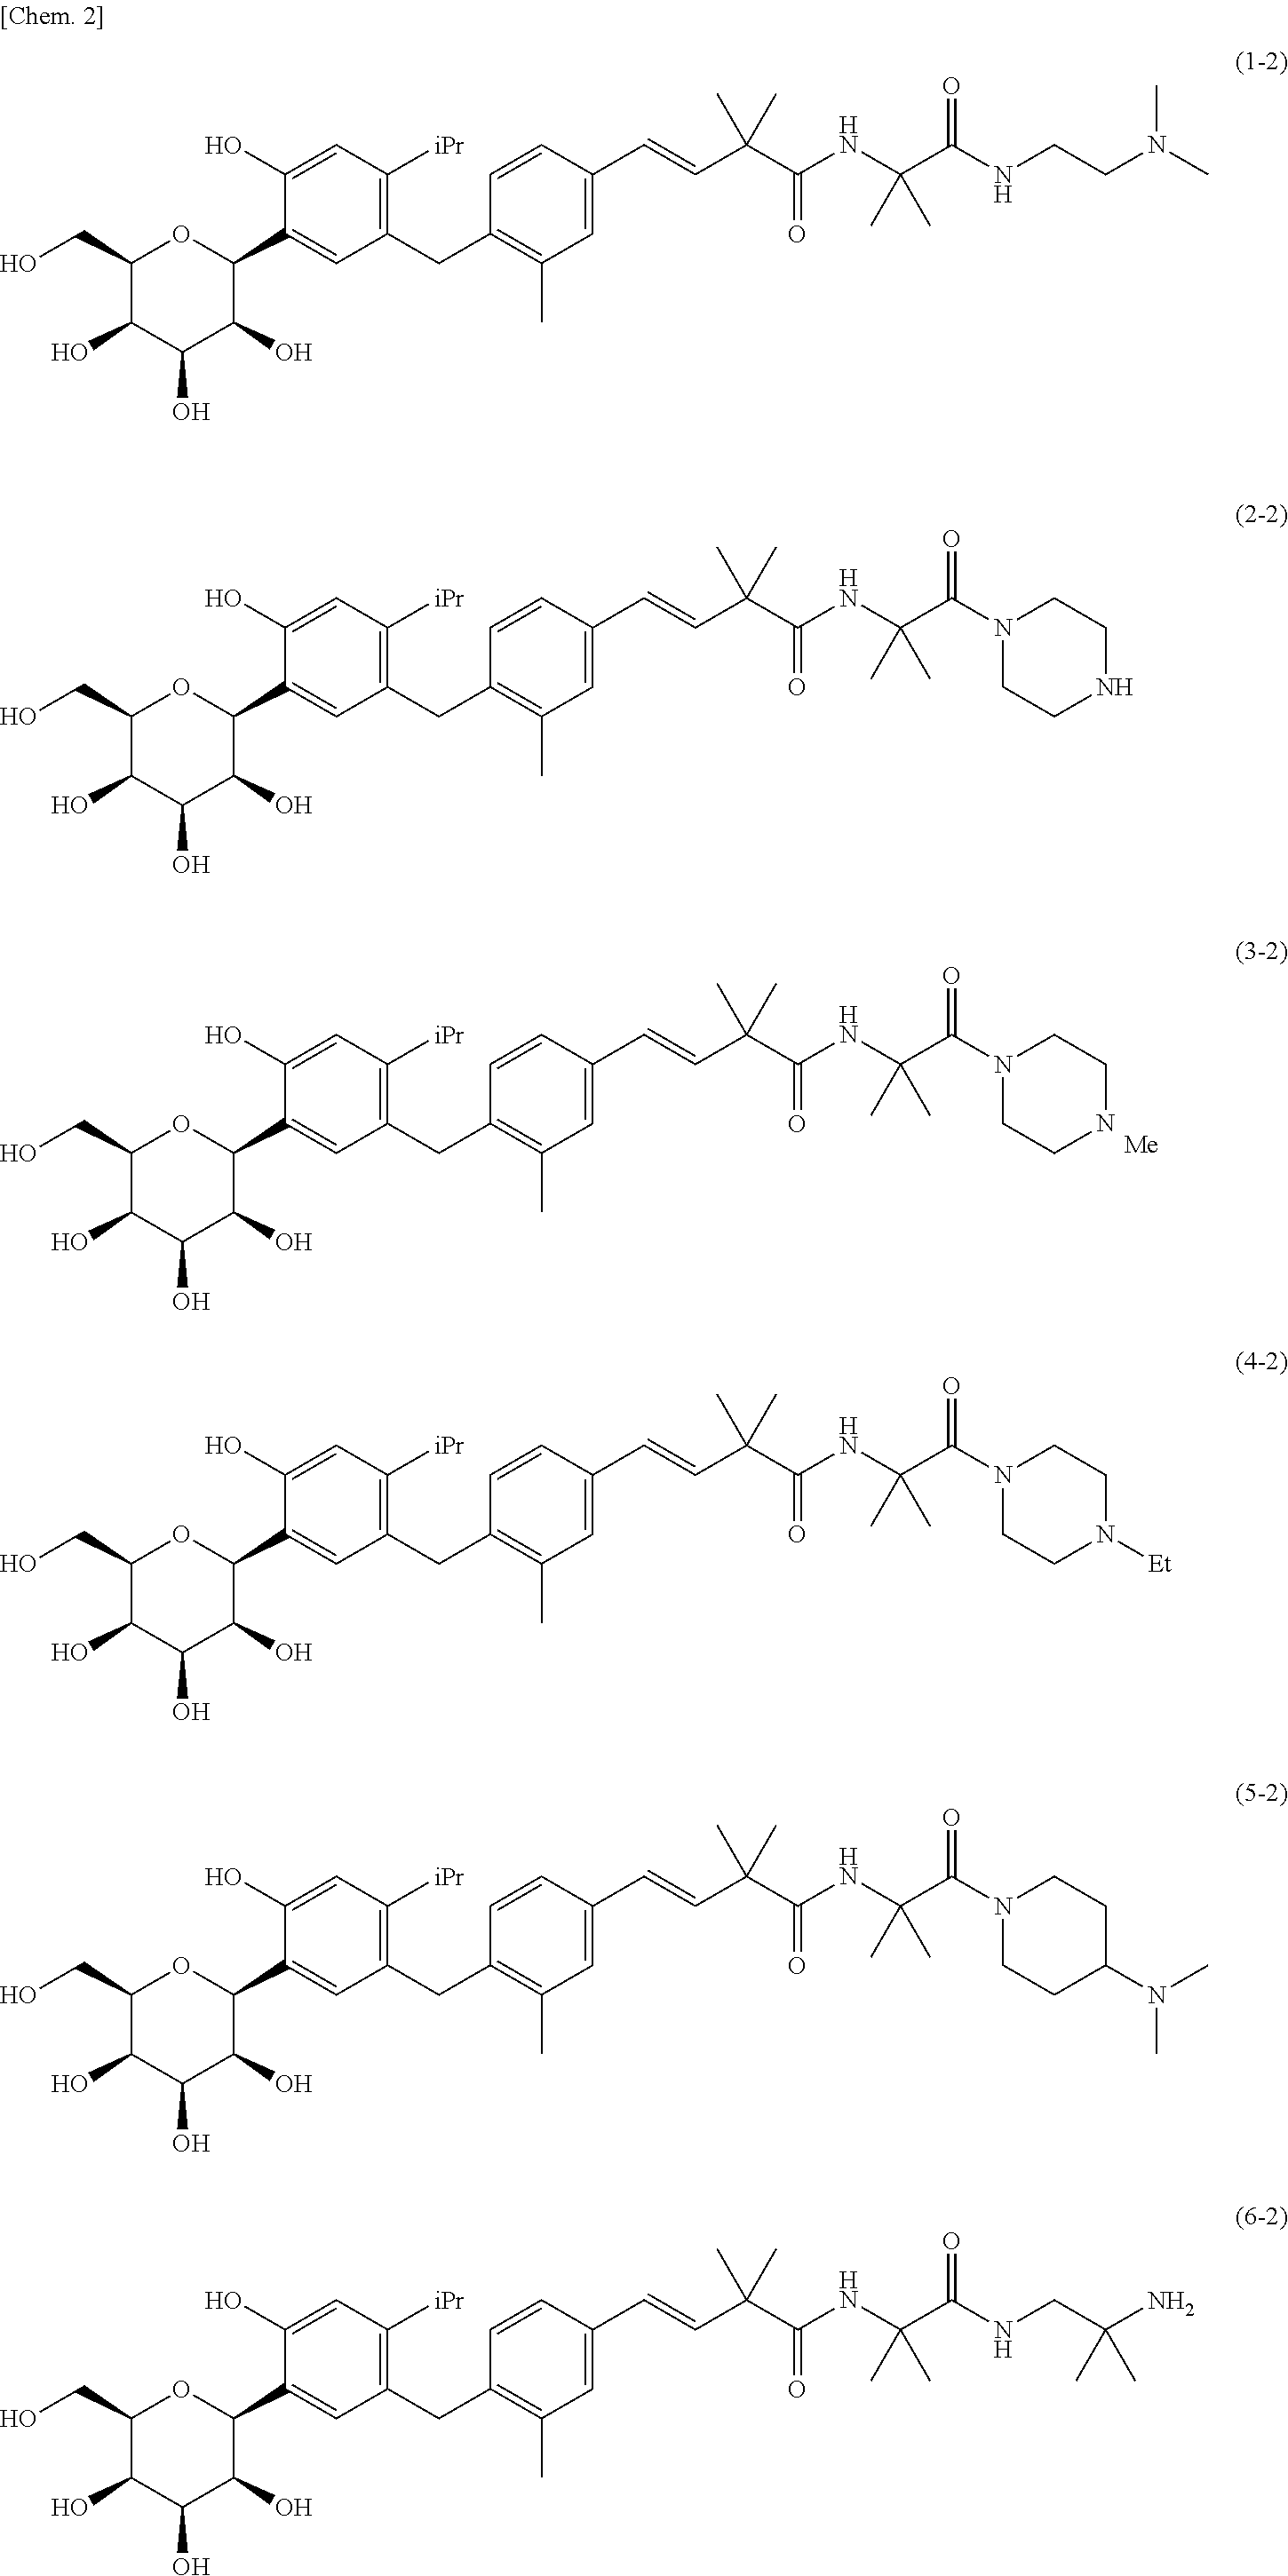 4-isopropylphenyl glucitol compounds as sglt1 inhibitors